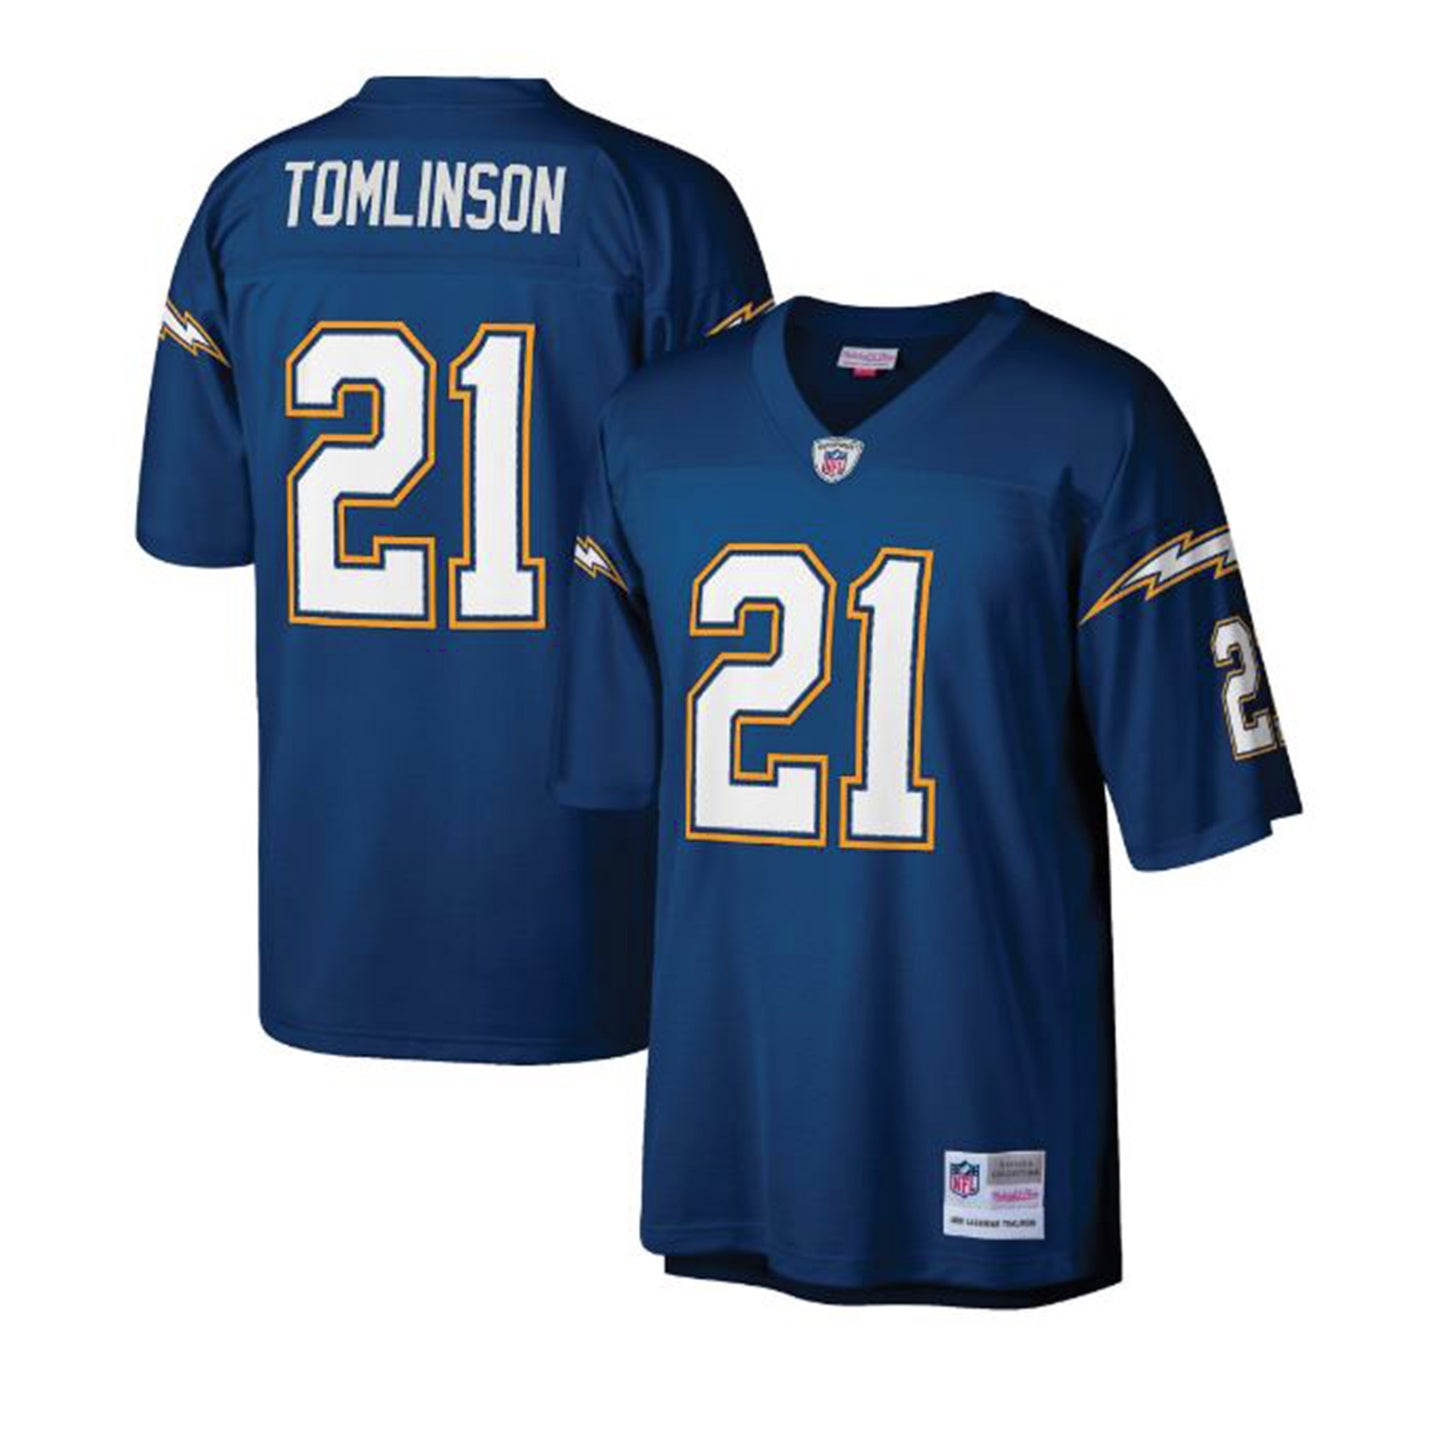 NFL Legacy Jersey San Diego Chargers Ladainian Tomlinson #21